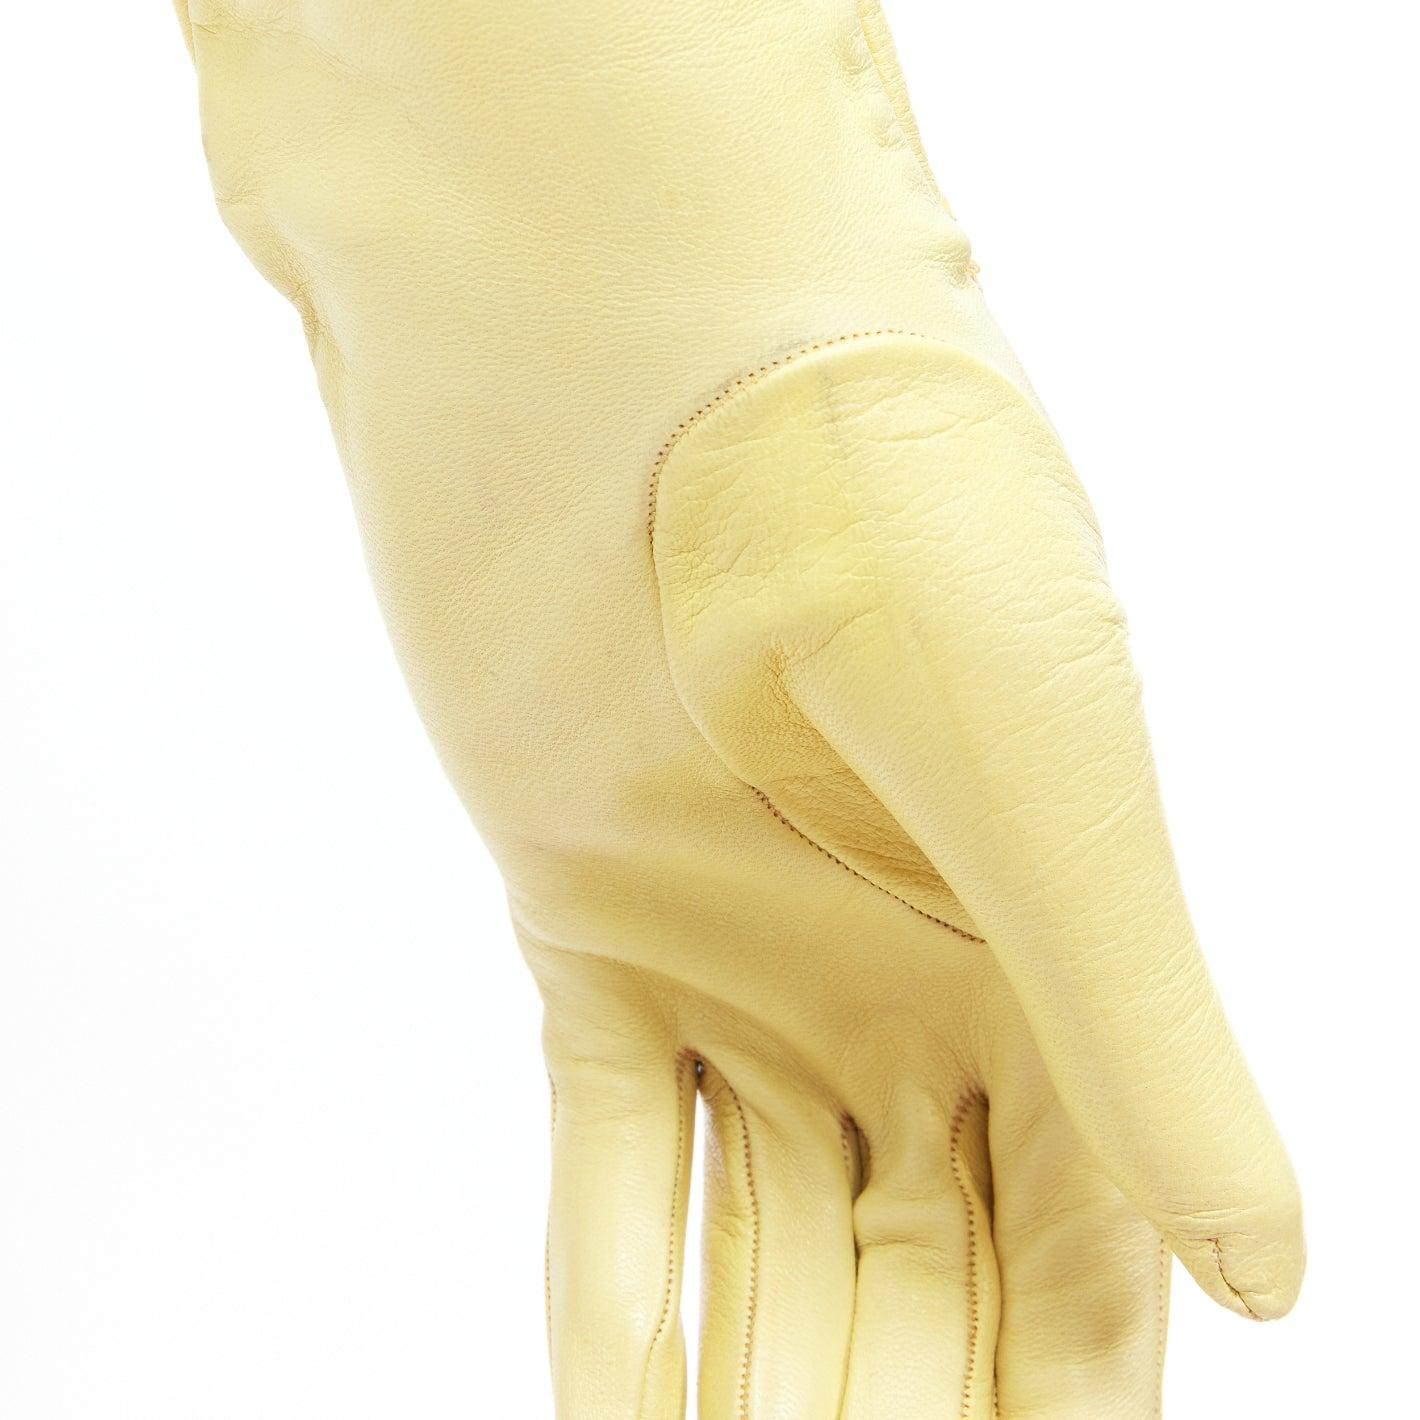 CLAUDE MONTANA Vintage yellow leather topstitch cut out gloves US7 For Sale 4